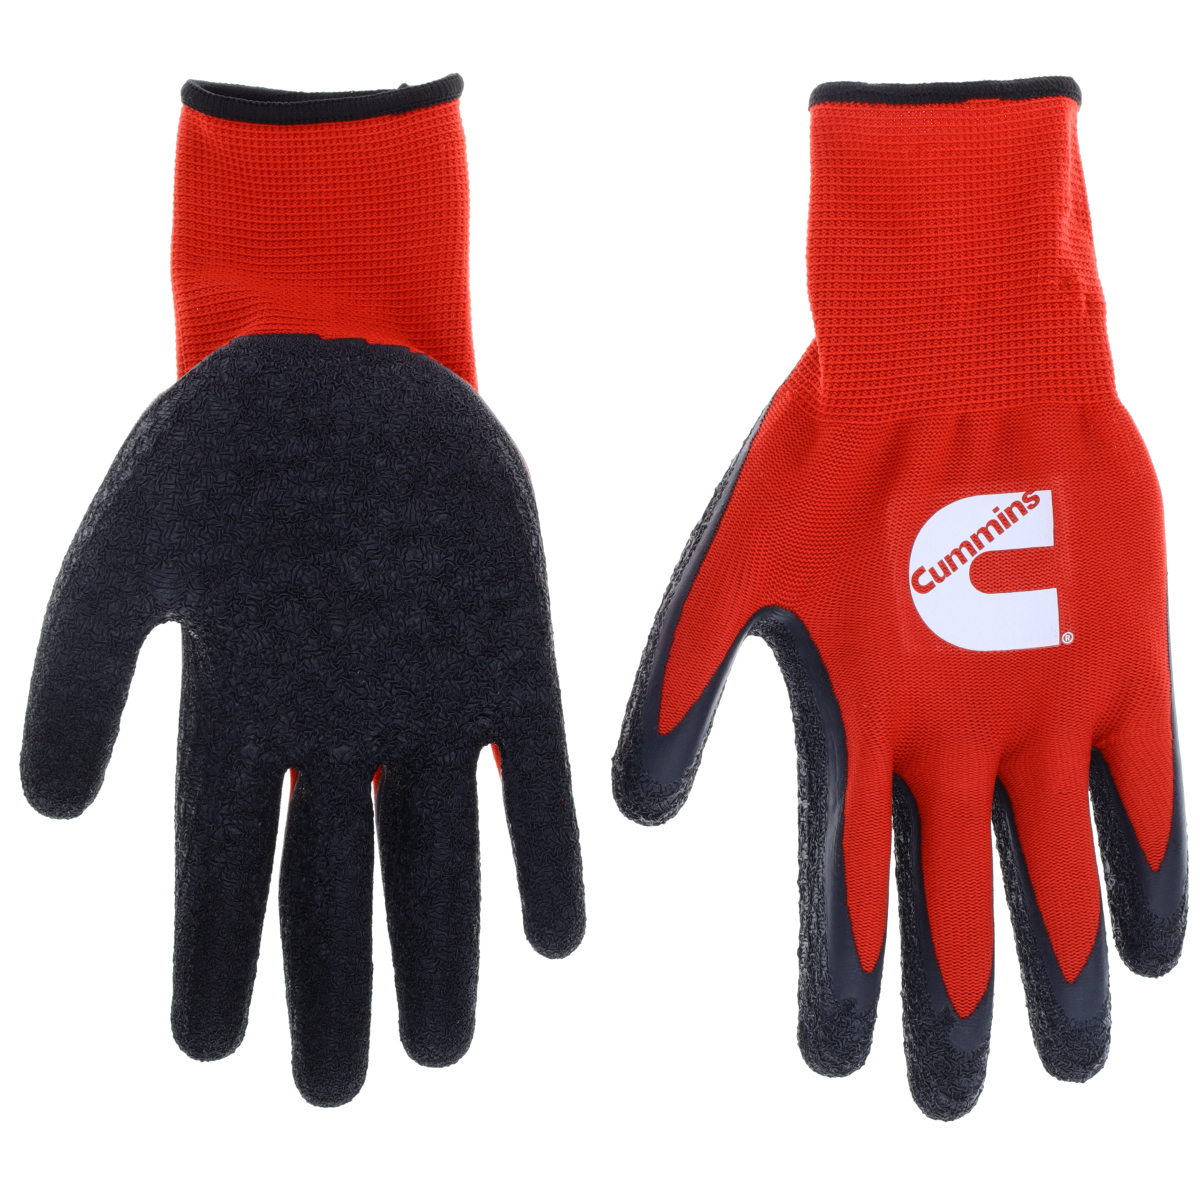 Red Latex Dipped Palm Gloves, Large